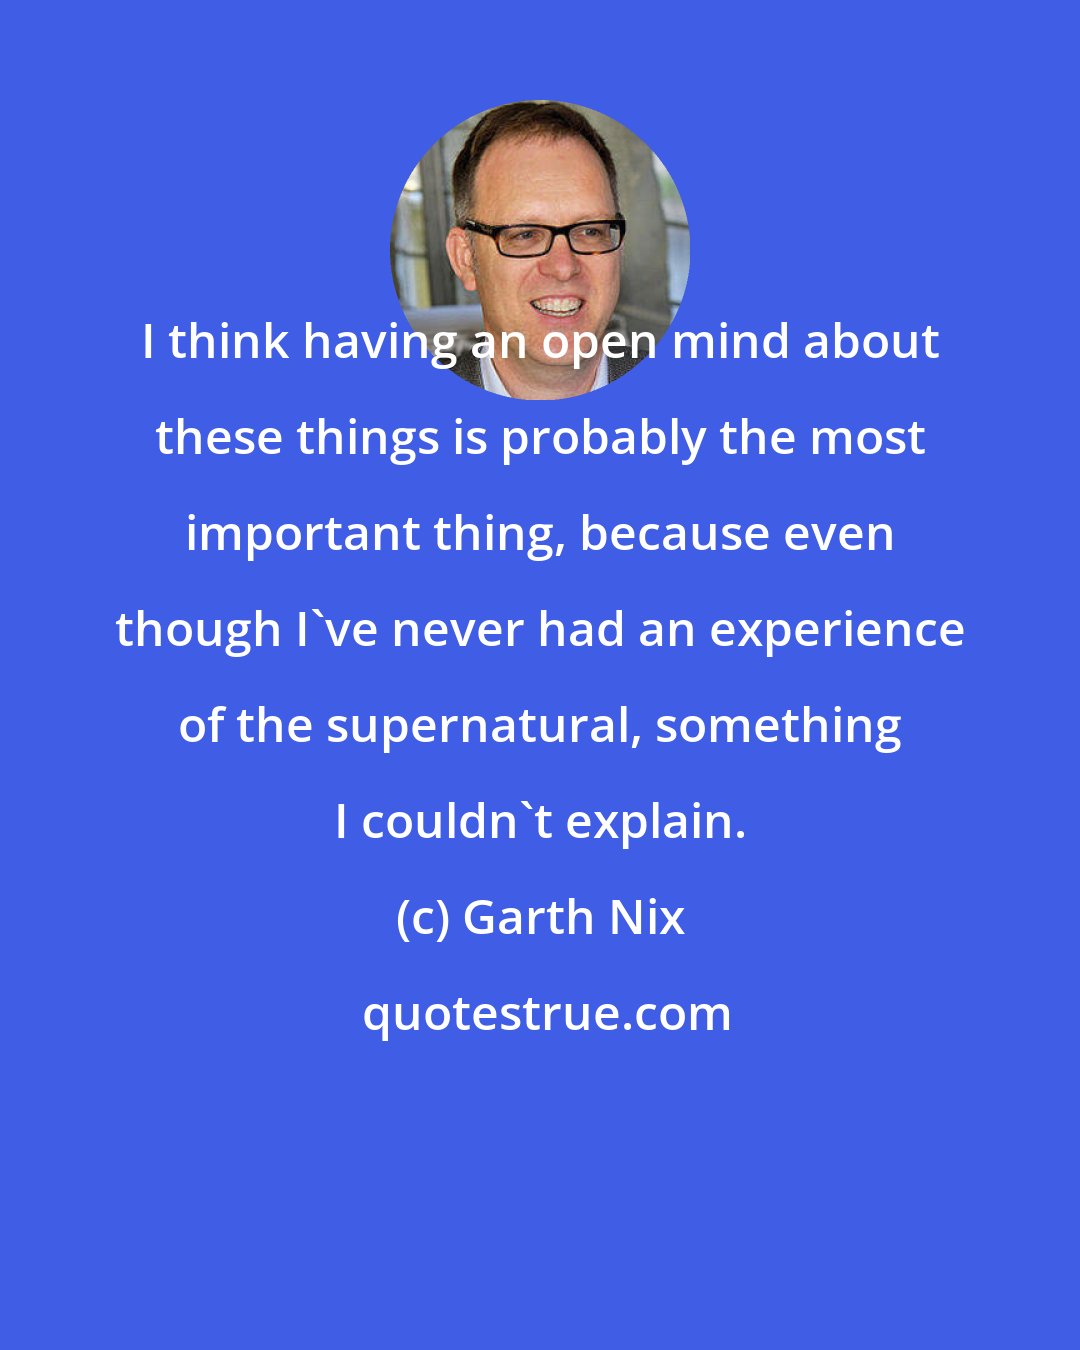 Garth Nix: I think having an open mind about these things is probably the most important thing, because even though I've never had an experience of the supernatural, something I couldn't explain.